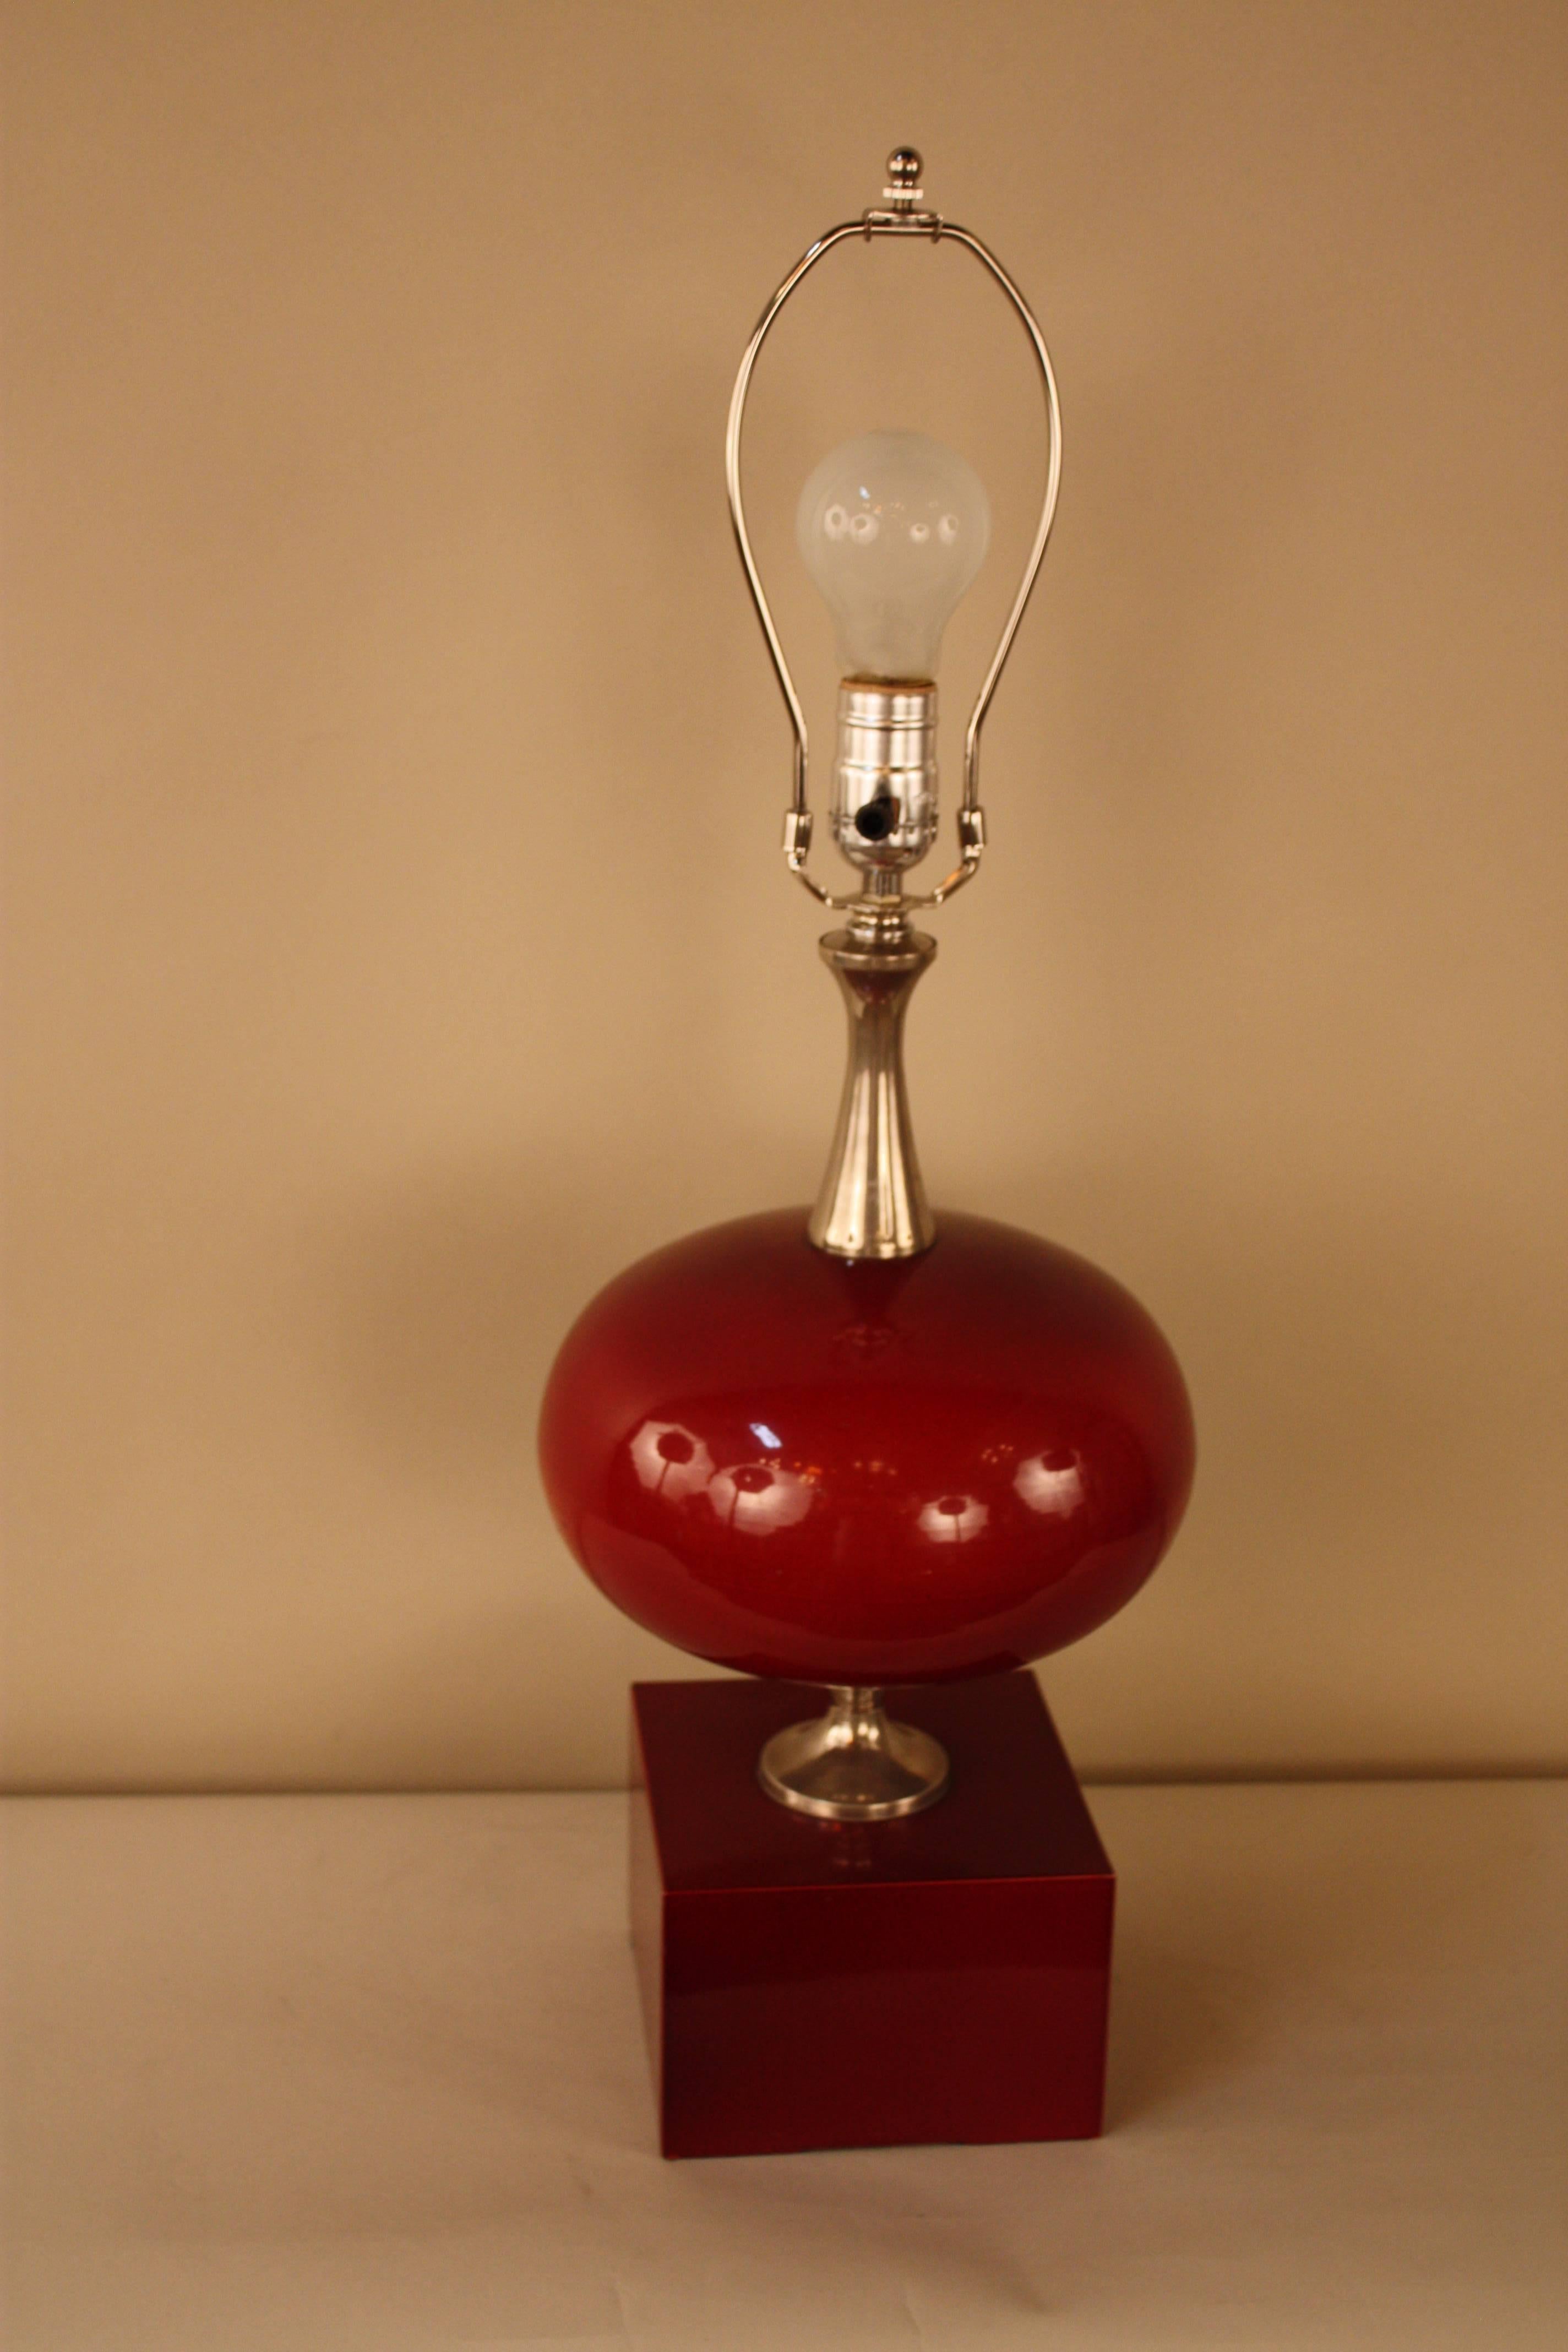 A fantastic and unusual red enamel and nickel from 1970s table lamp.
While Maison Barbier carried many marble lamp but the enamel work is rare. We have another very similar lamp from the same house in stock